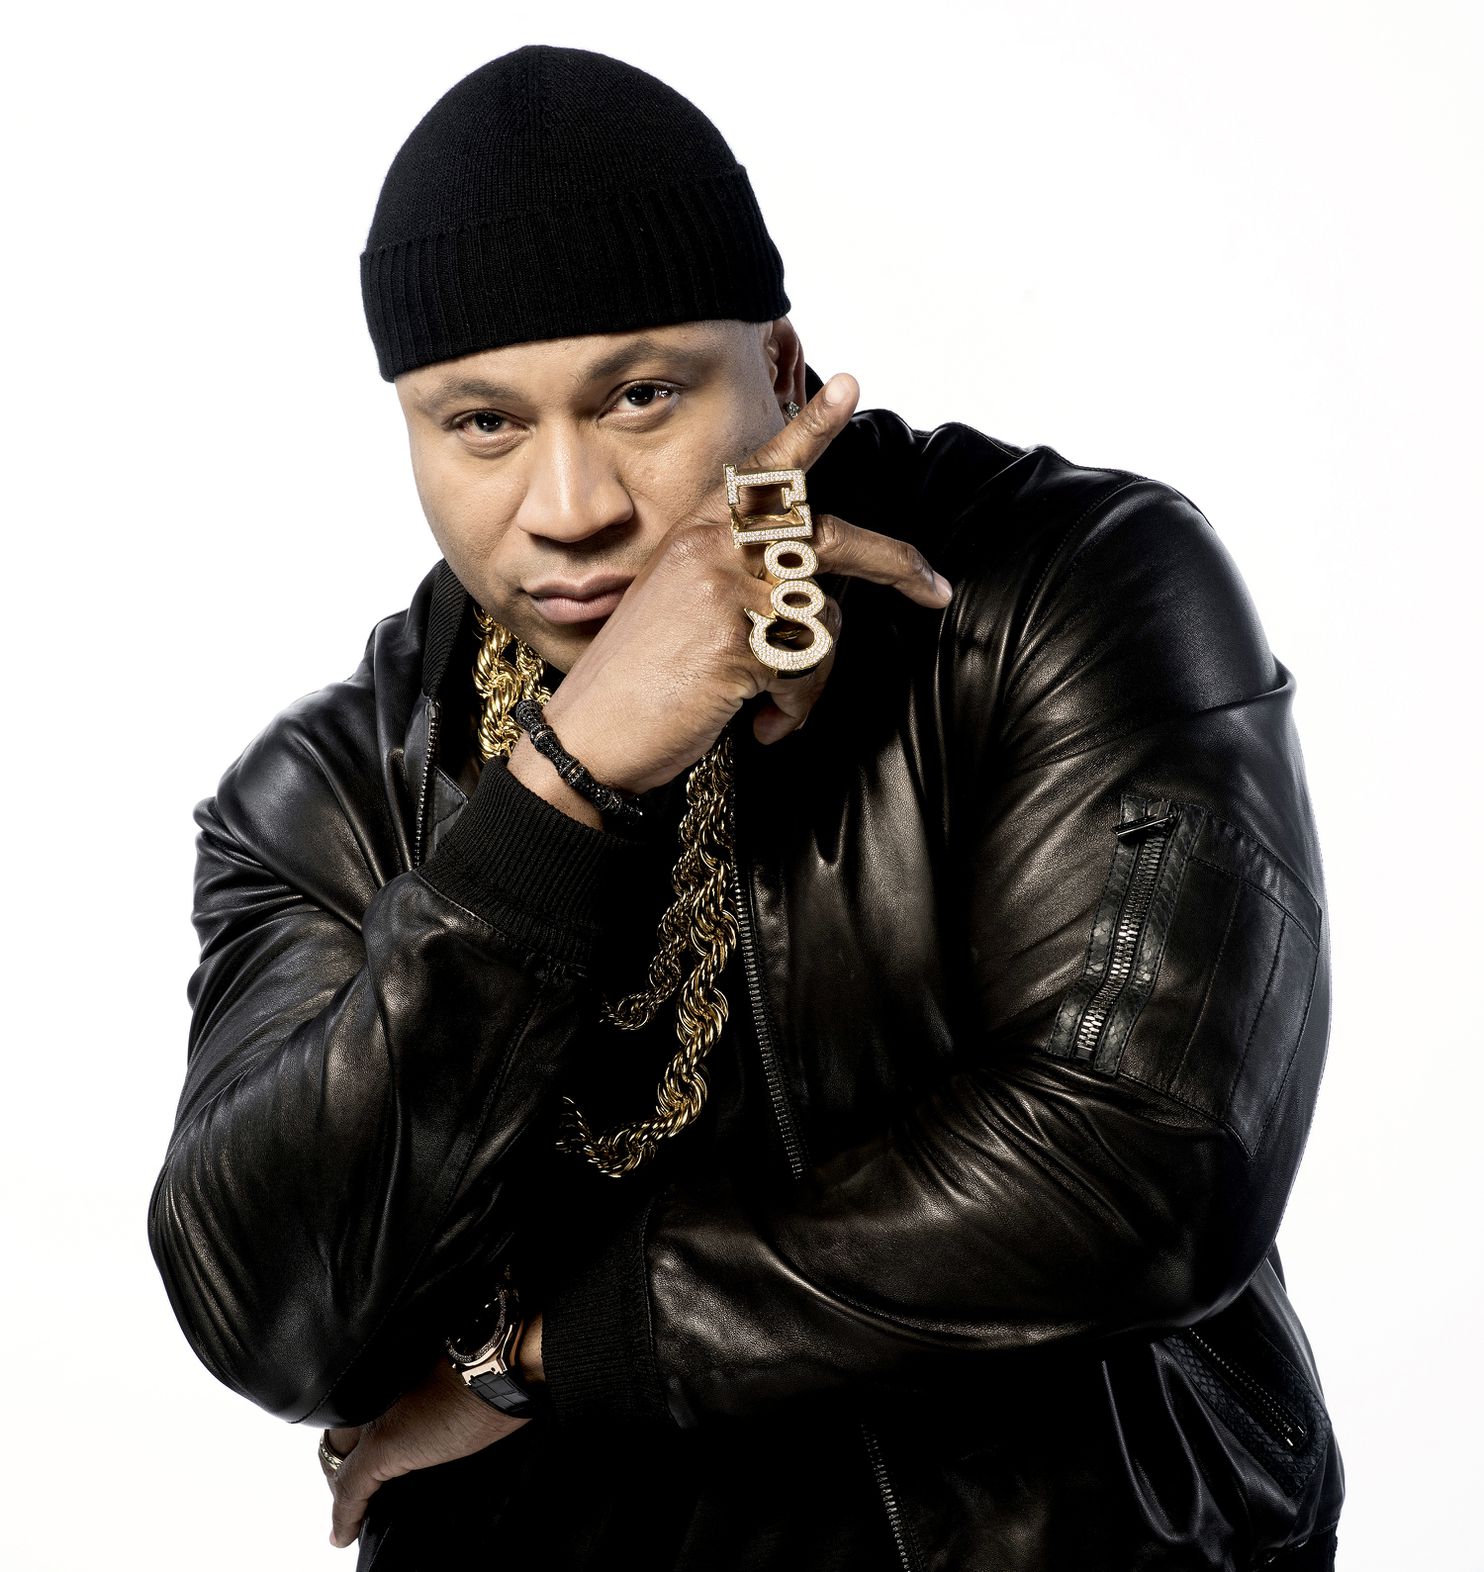 Top 91+ Images pictures of ll cool j Excellent